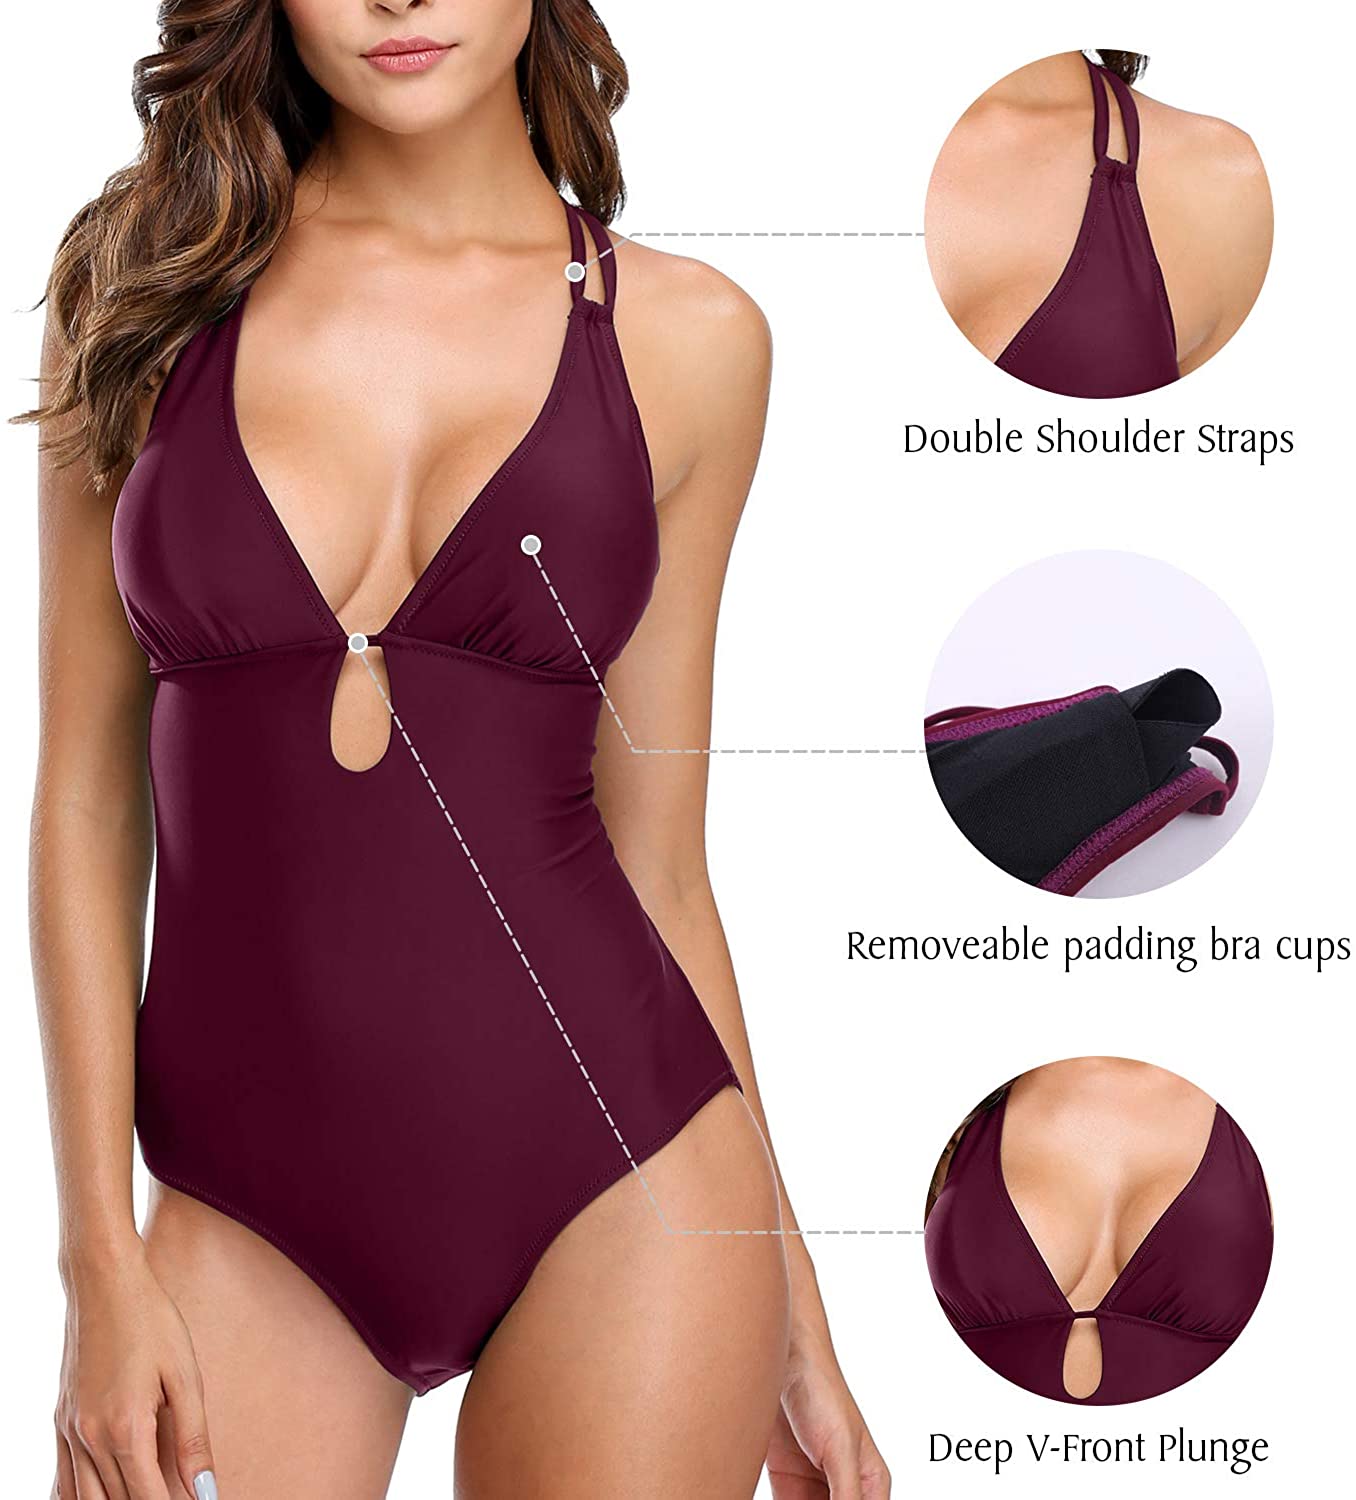 Charmo V Neck One Piece Swimsuits Lace-up Back Monokini Bathing Suit for Women - image 3 of 6